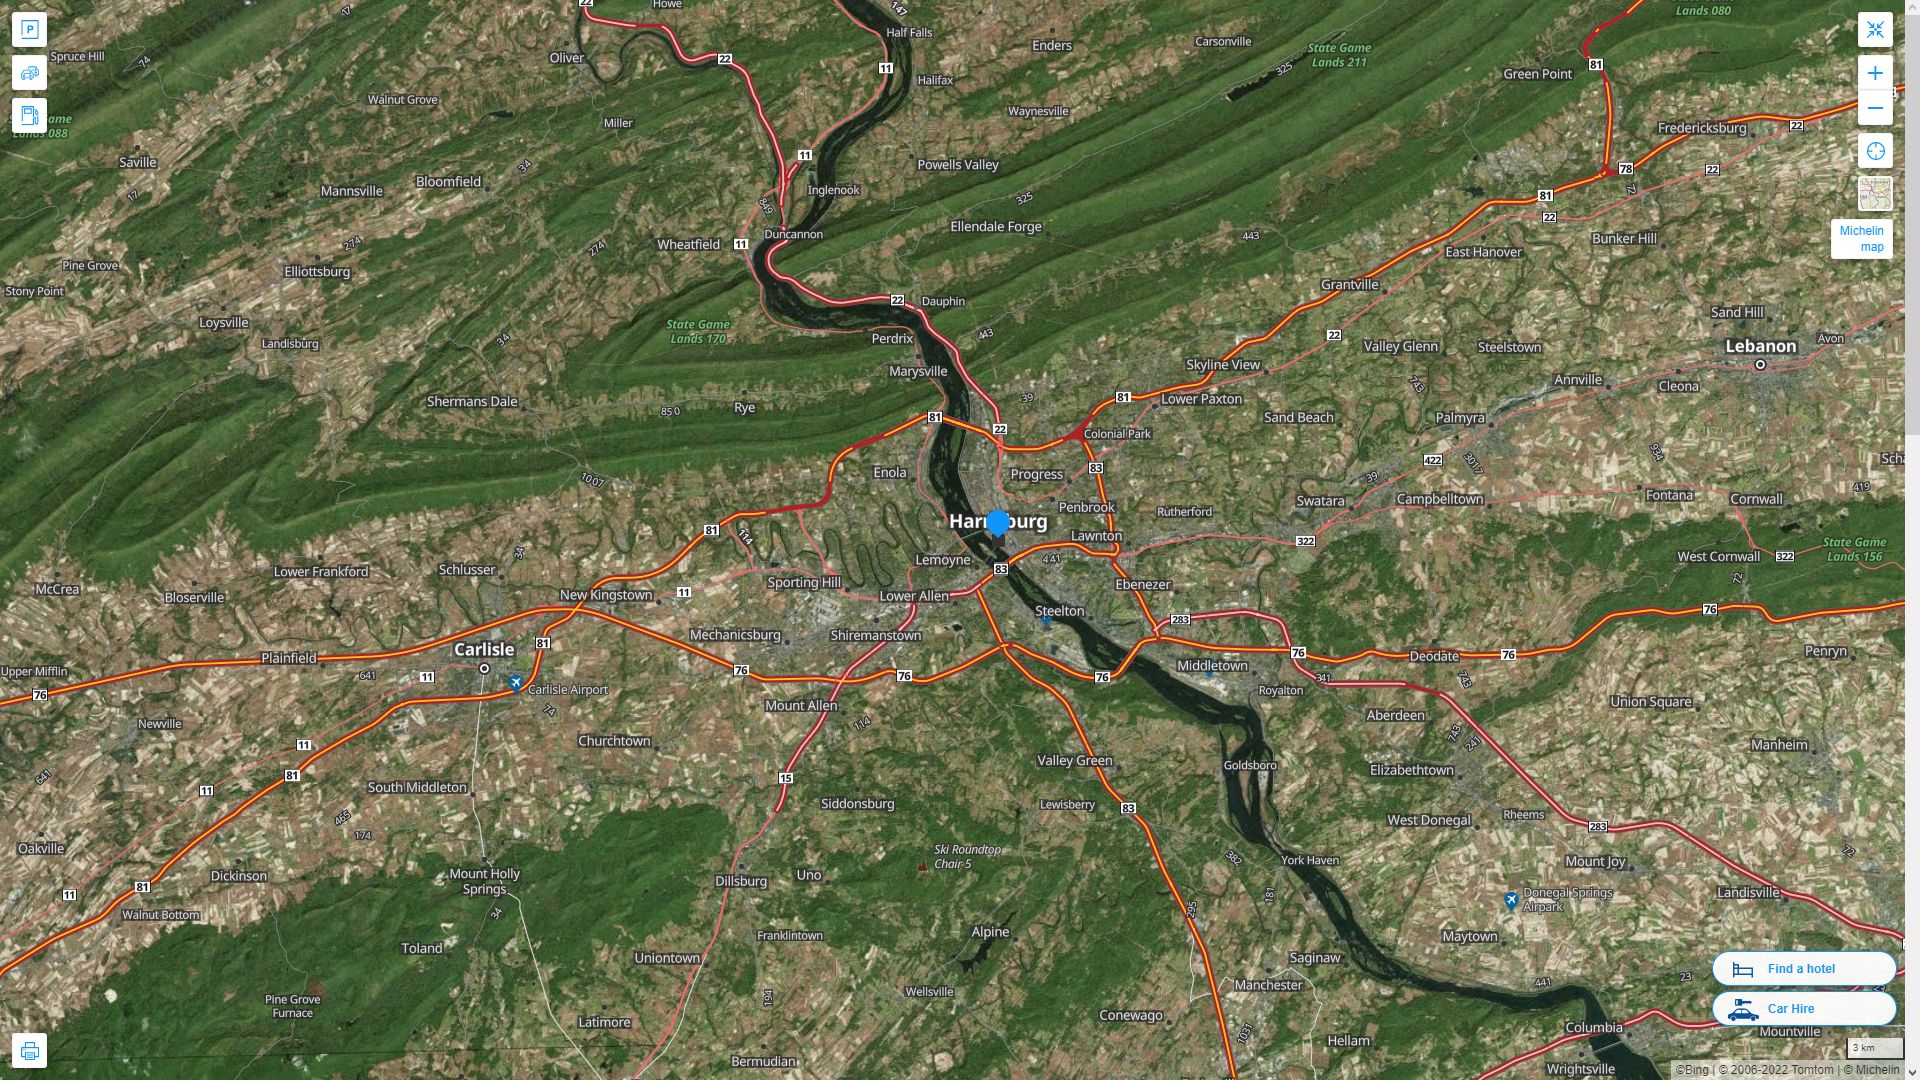 Harrisburg Pennsylvania Highway and Road Map with Satellite View